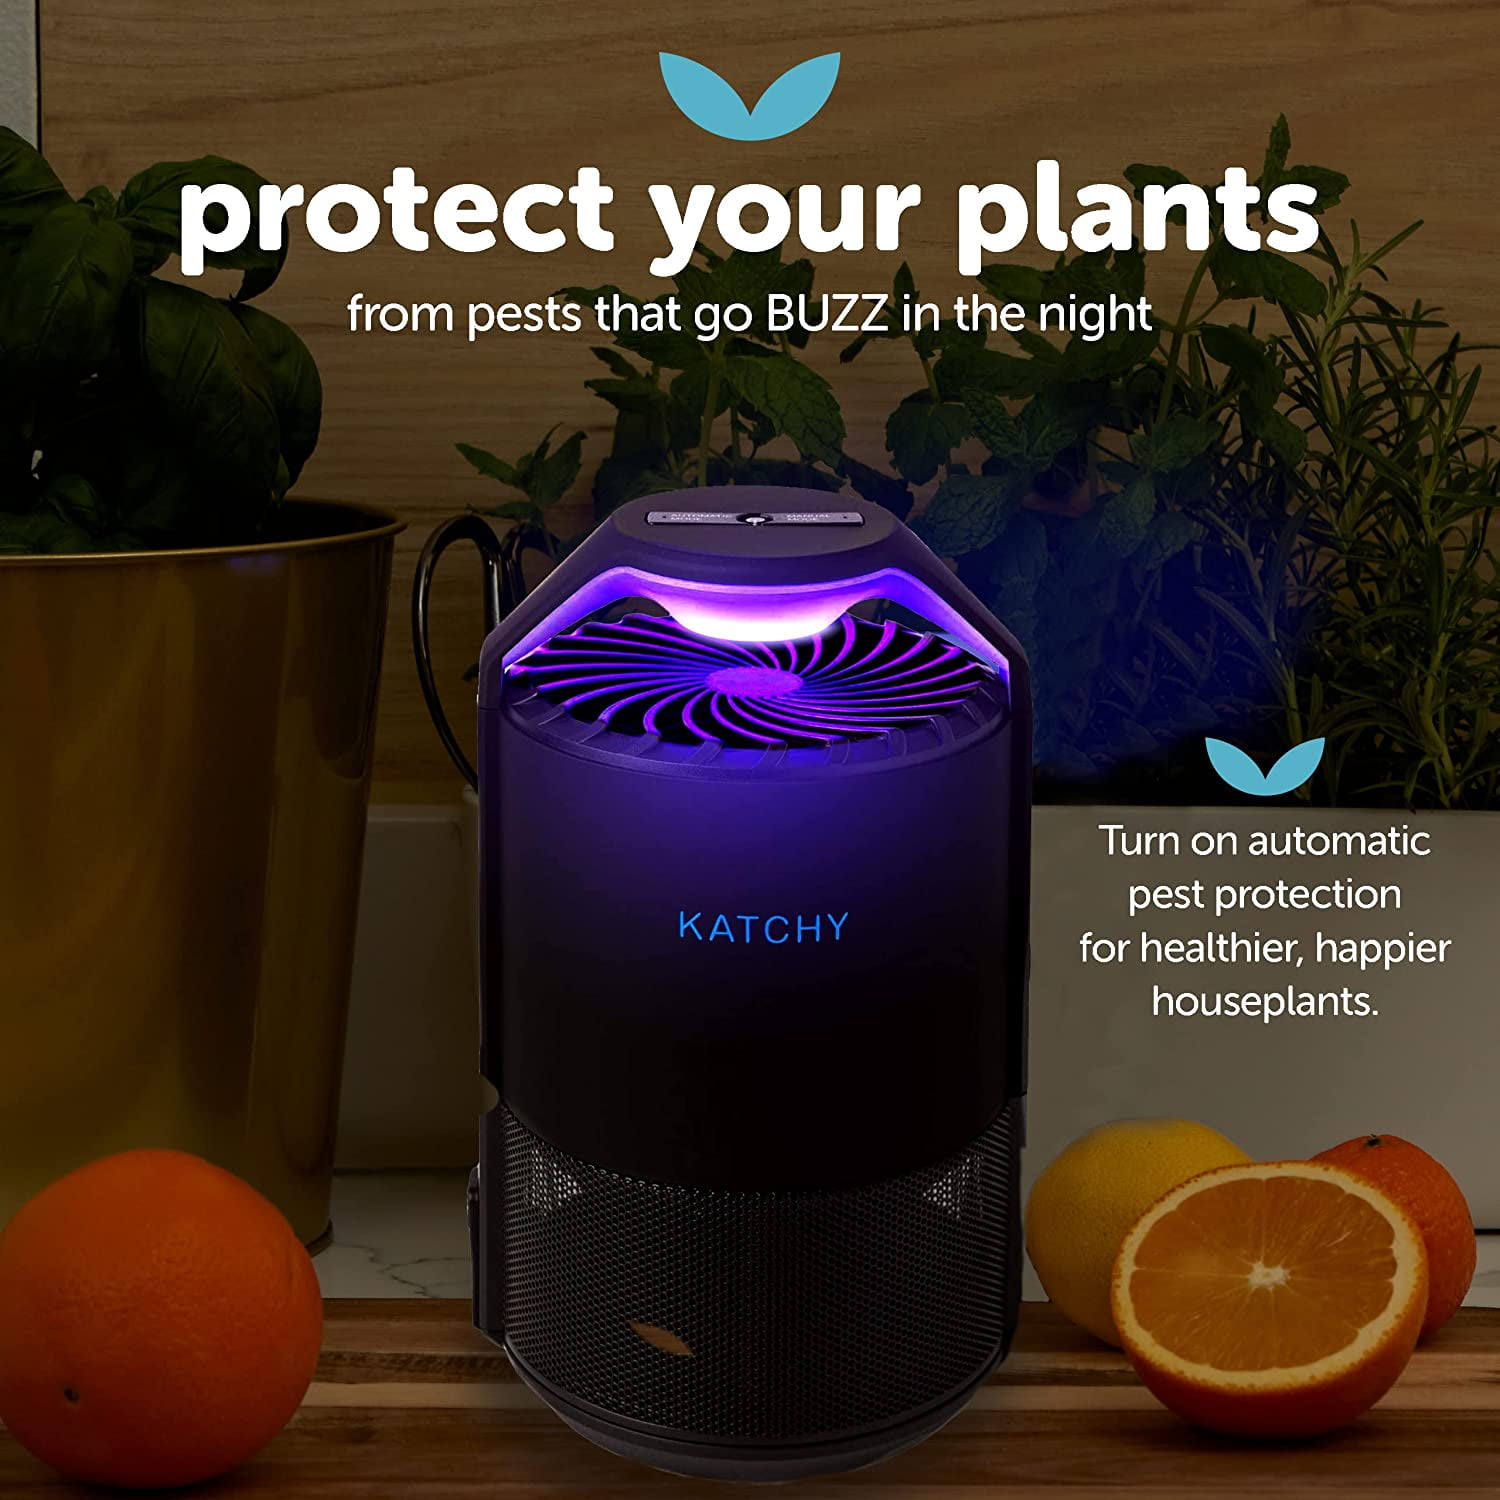 This Top-Rated Katchy Indoor Fly Trap Is On Sale